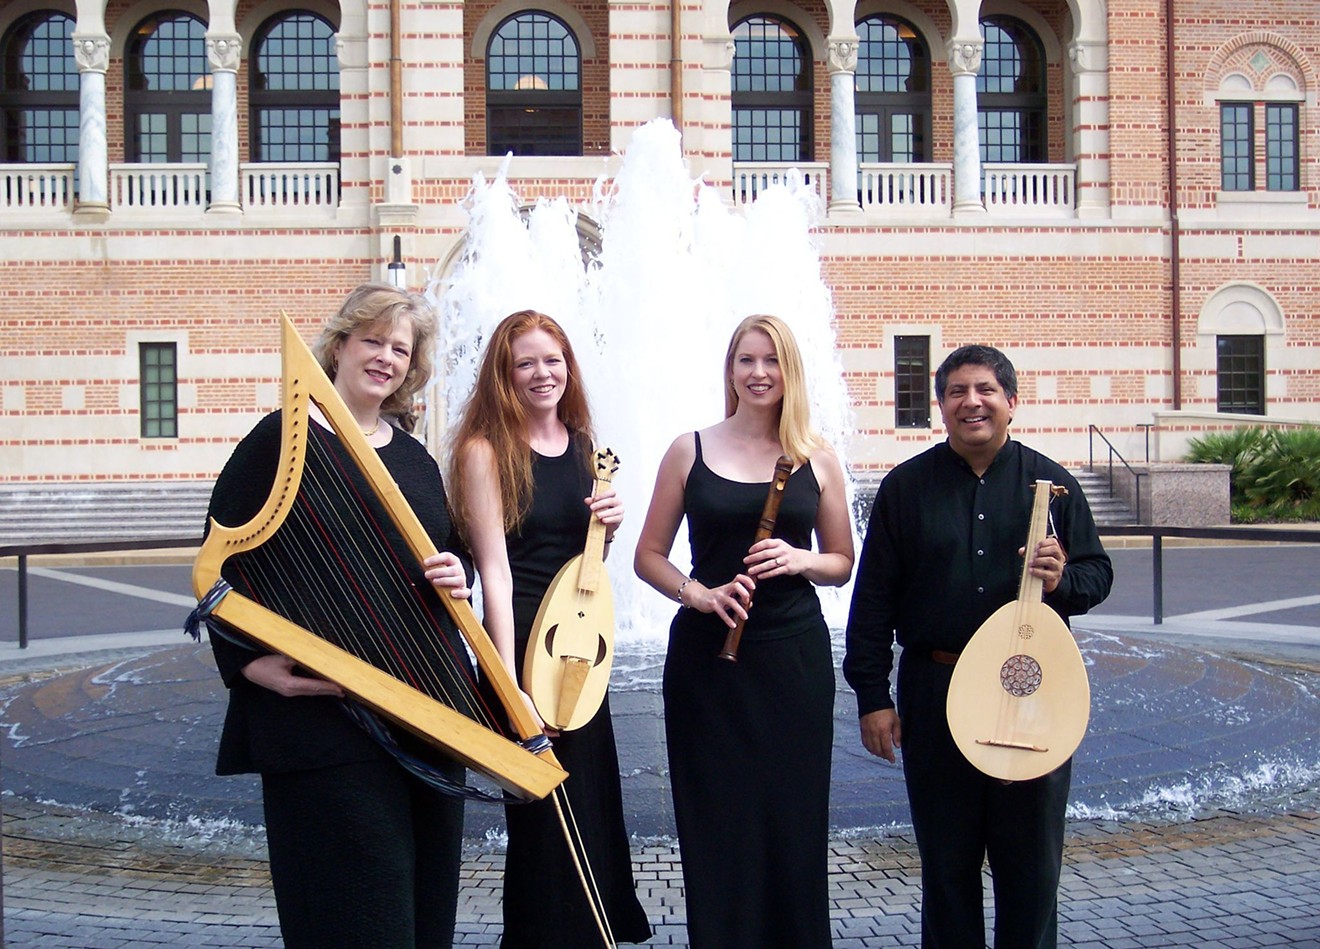 Houston Early Music will present Exiled, a concert by Istanpitta, Saturday, Feb. 25, at Kaplan Theater, Evelyn Rubenstein Jewish Community Center of Houston.